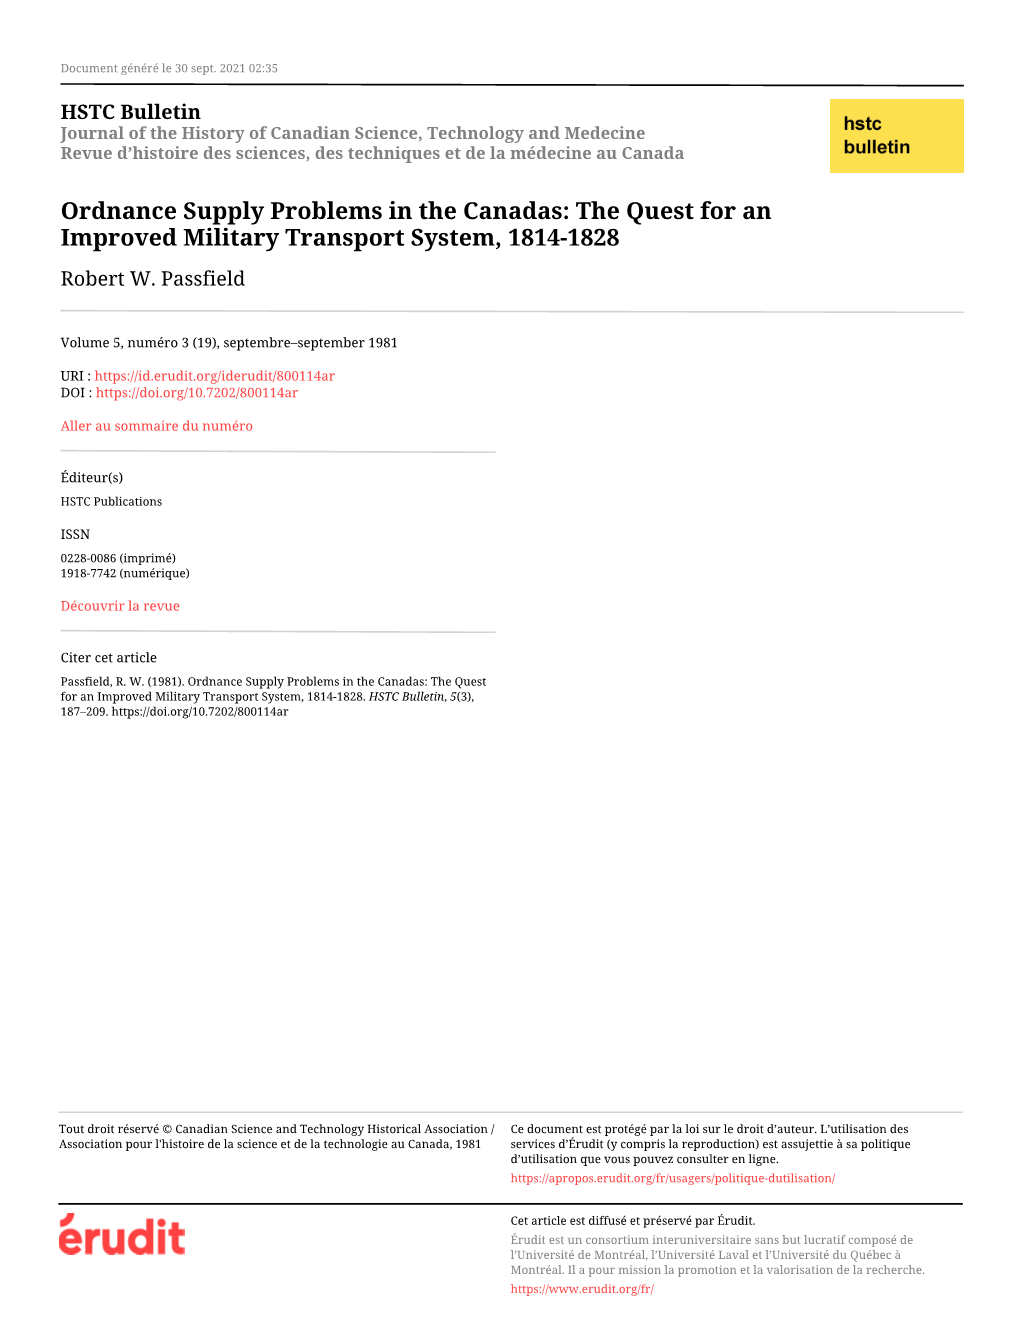 Ordnance Supply Problems in the Canadas: the Quest for an Improved Military Transport System, 1814-1828 Robert W